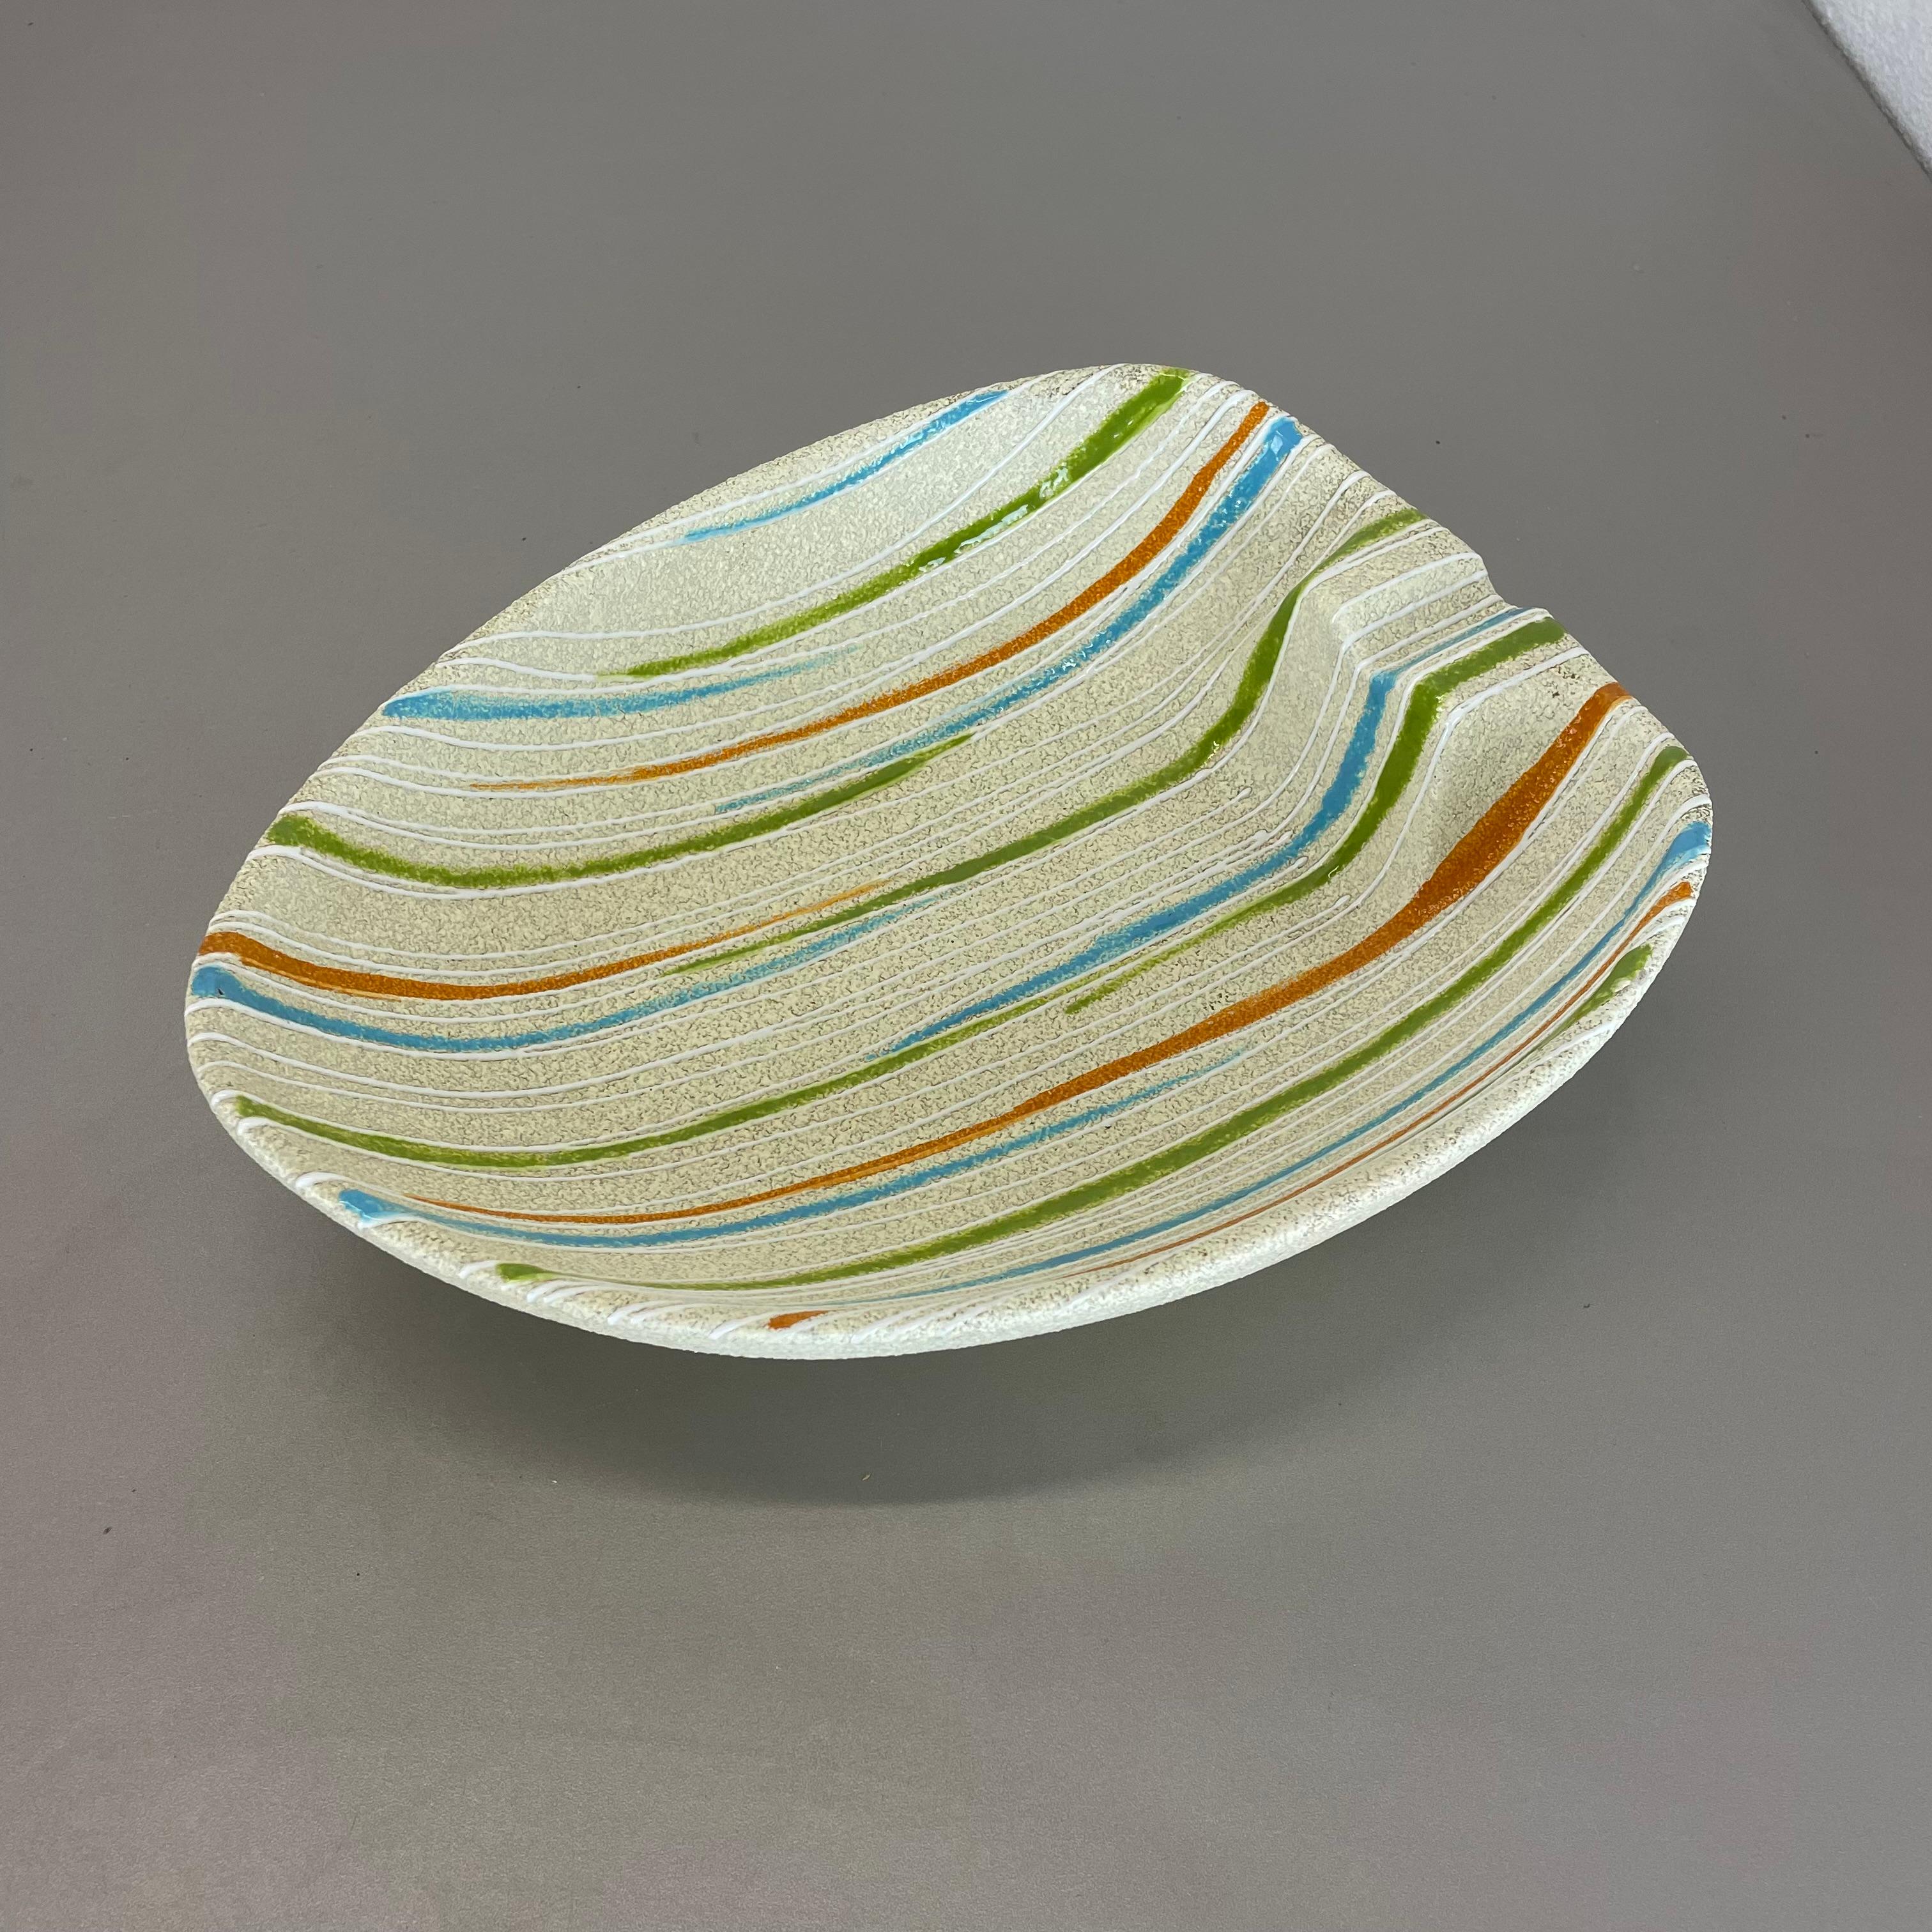 Article:

Ceramic shell bowl


Producer:

Fratelli Fanciullaci, Italy


Designer:

Fratelli Fanciullaci




Decade:

1950s



This original studio pottery vintage plate element was designed by Fratelli Fanciullacci and handmade in ITALY in the